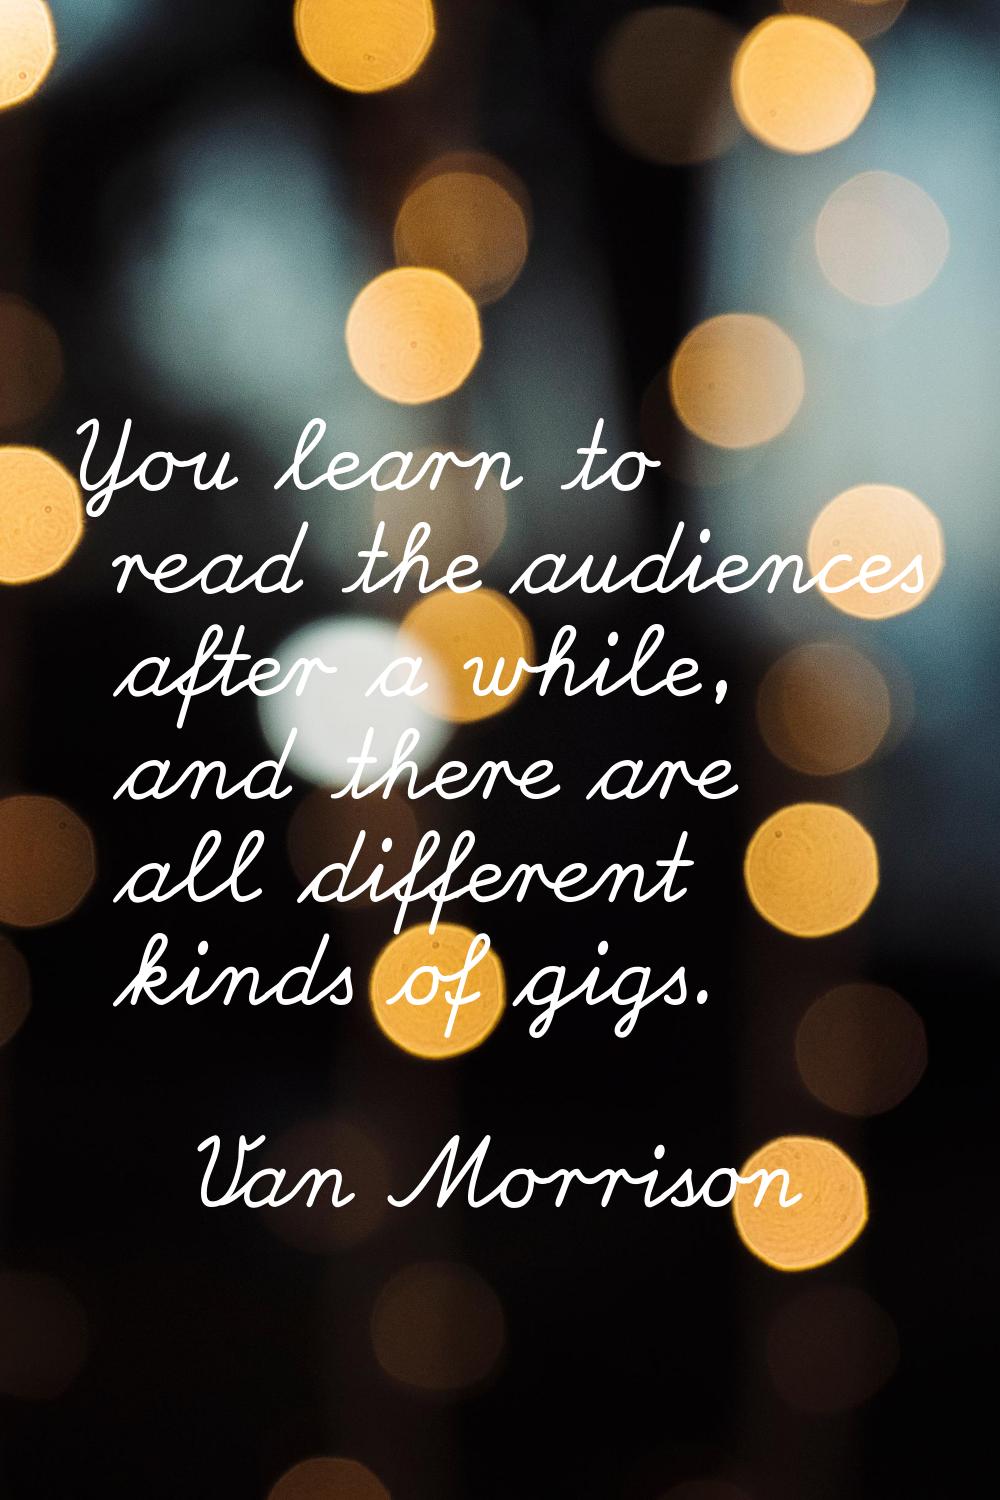 You learn to read the audiences after a while, and there are all different kinds of gigs.